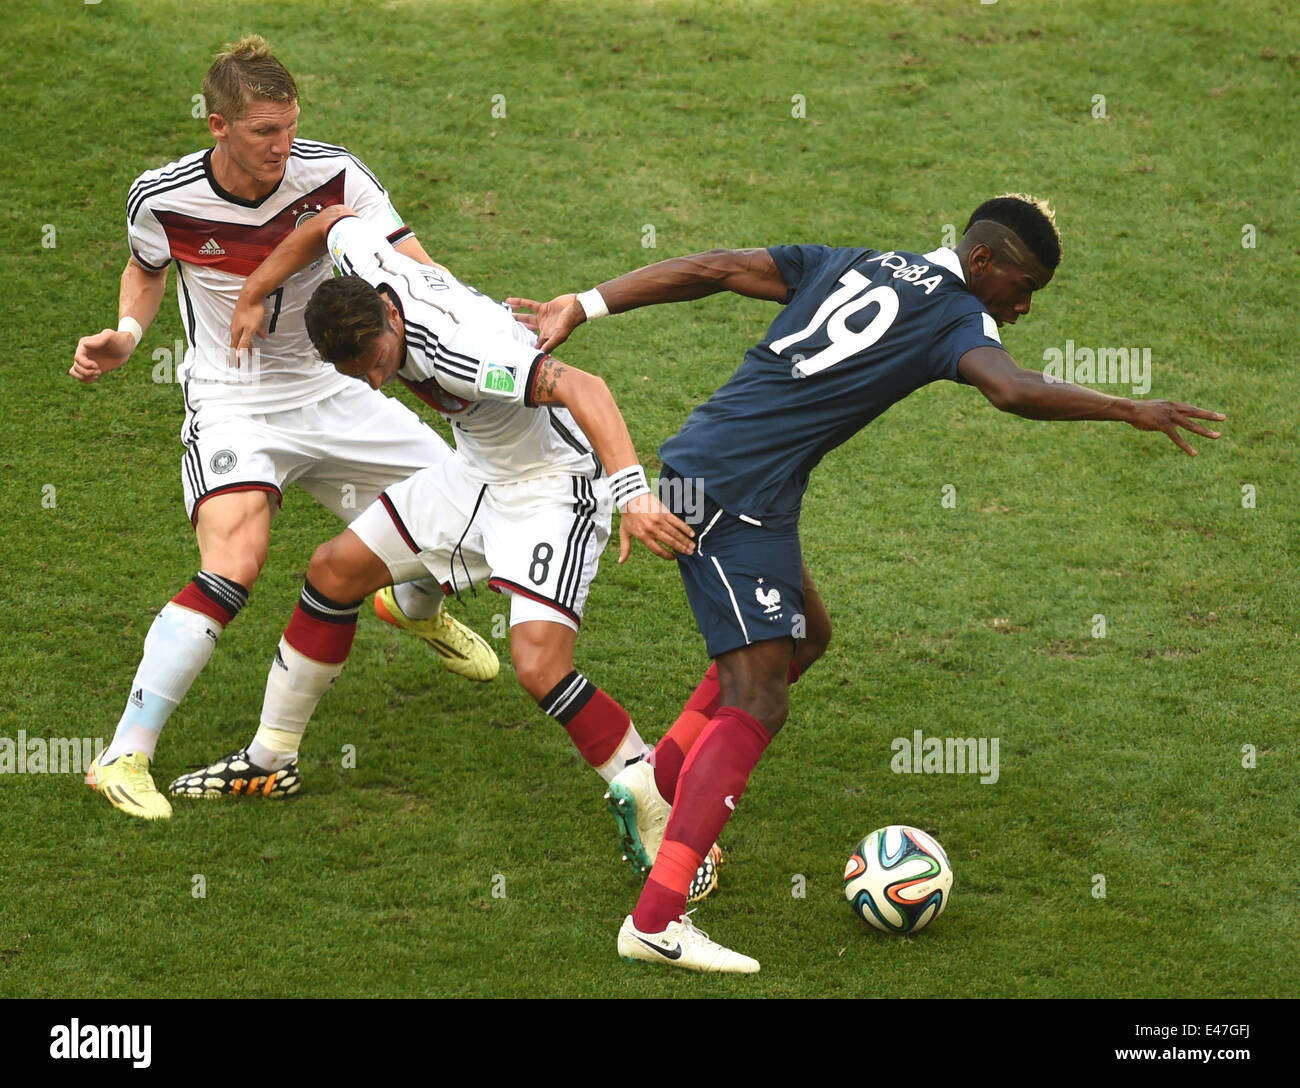 Rio de Janeiro, Brazil. 04th July, 2014. Bastian Schweinsteiger (L) and Mesut Oezil (C) of Germany vie for the ball with Paul Pogba of France during the FIFA World Cup 2014 quarter final soccer match between France and Germany at Estadio do Maracana in Rio de Janeiro, Brazil, 04 July 2014. Photo: Marcus Brandt/dpa/Alamy Live News Stock Photo